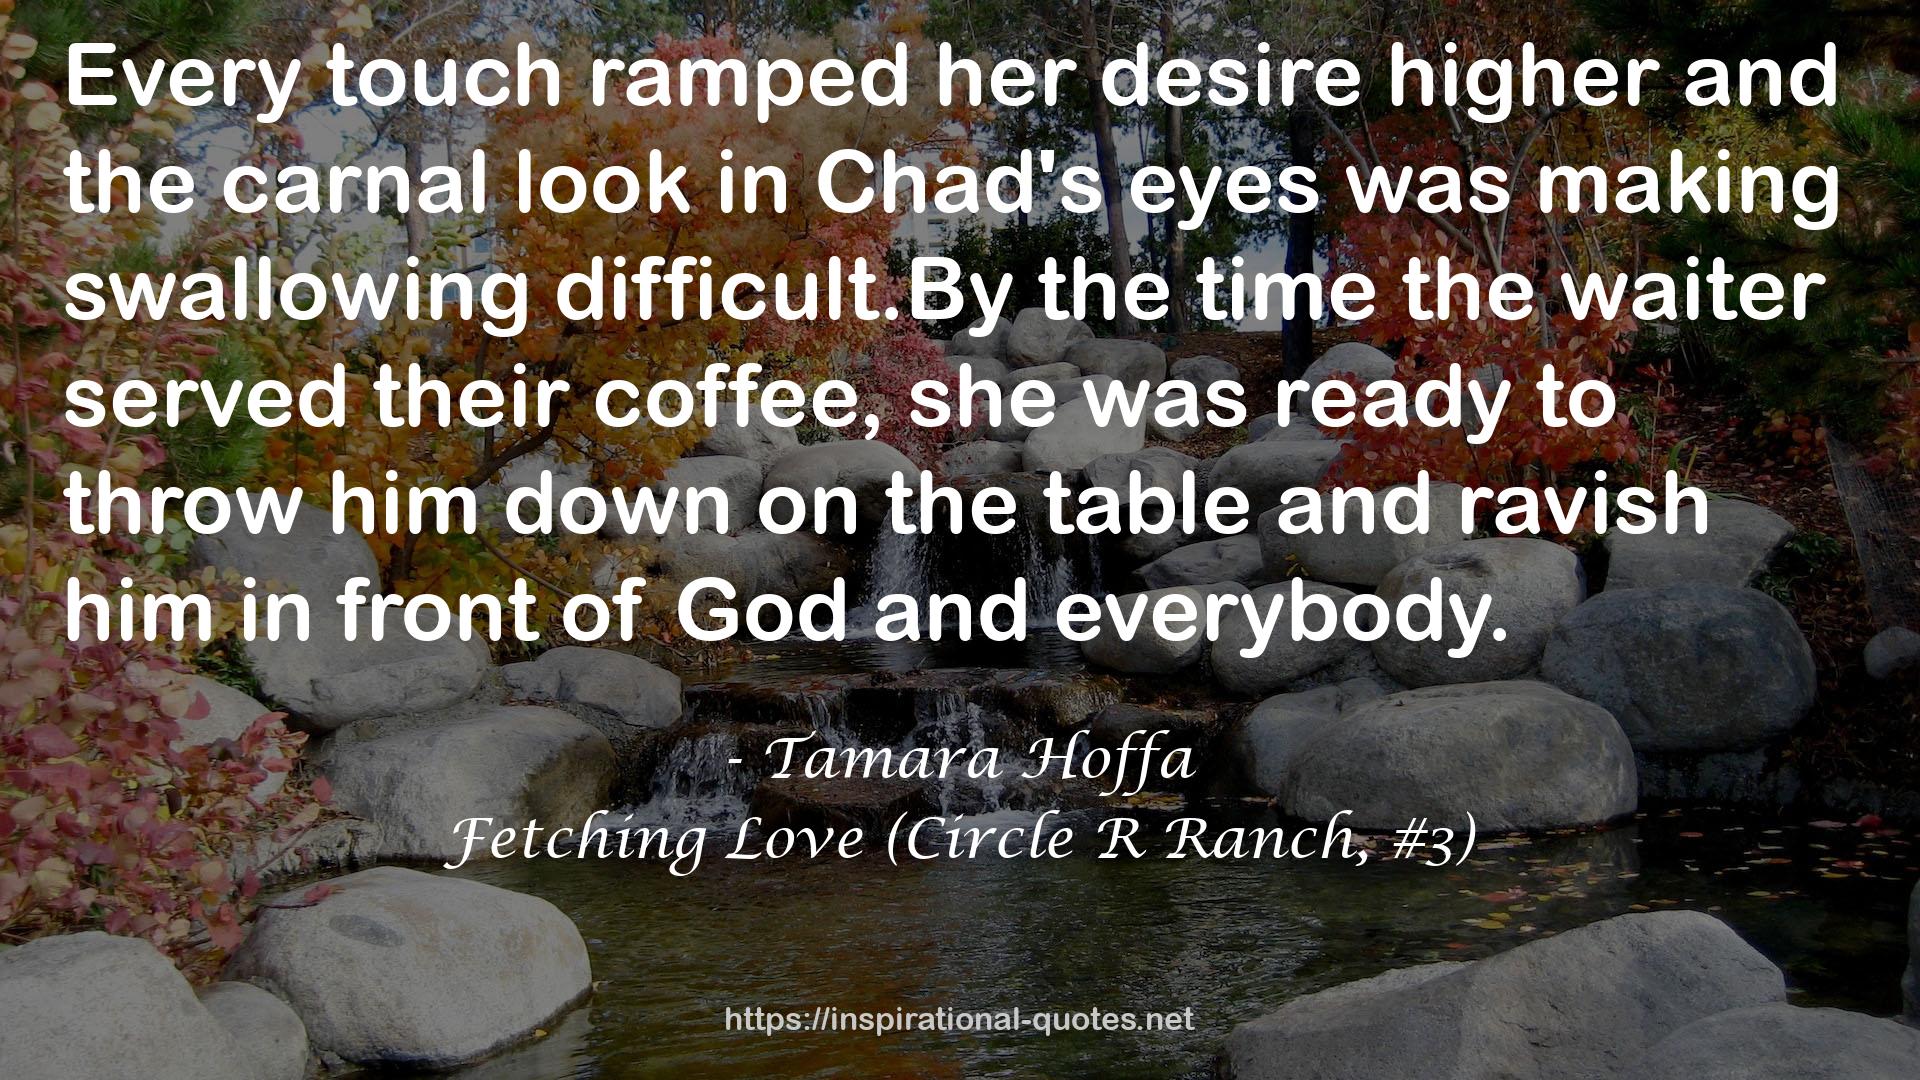 Fetching Love (Circle R Ranch, #3) QUOTES